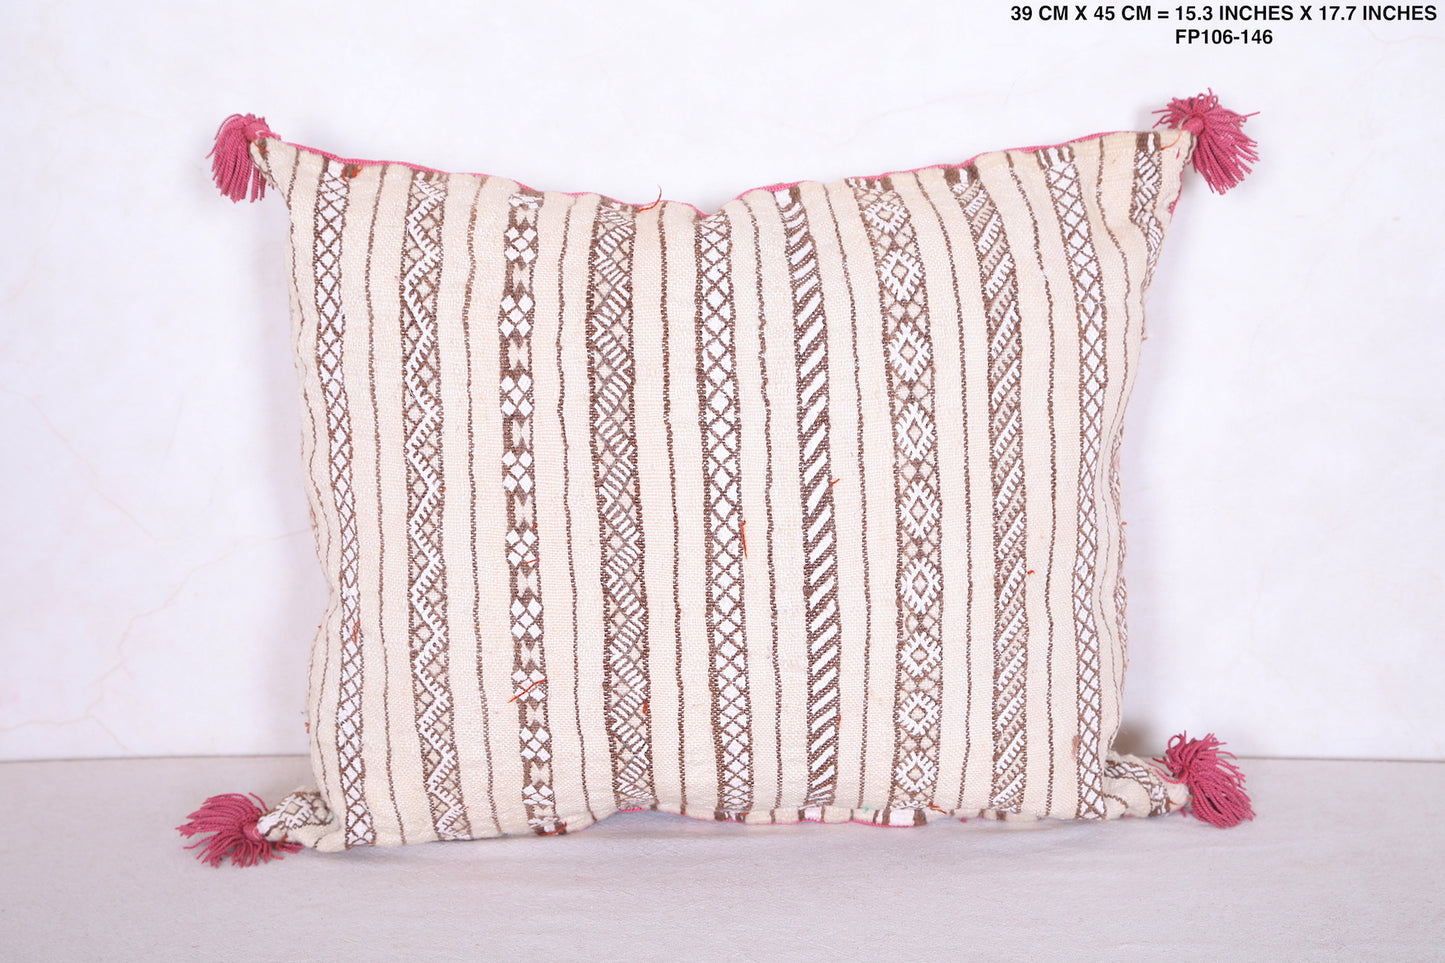 Moroccan handmade kilim pillow 15.3 INCHES X 17.7 INCHES